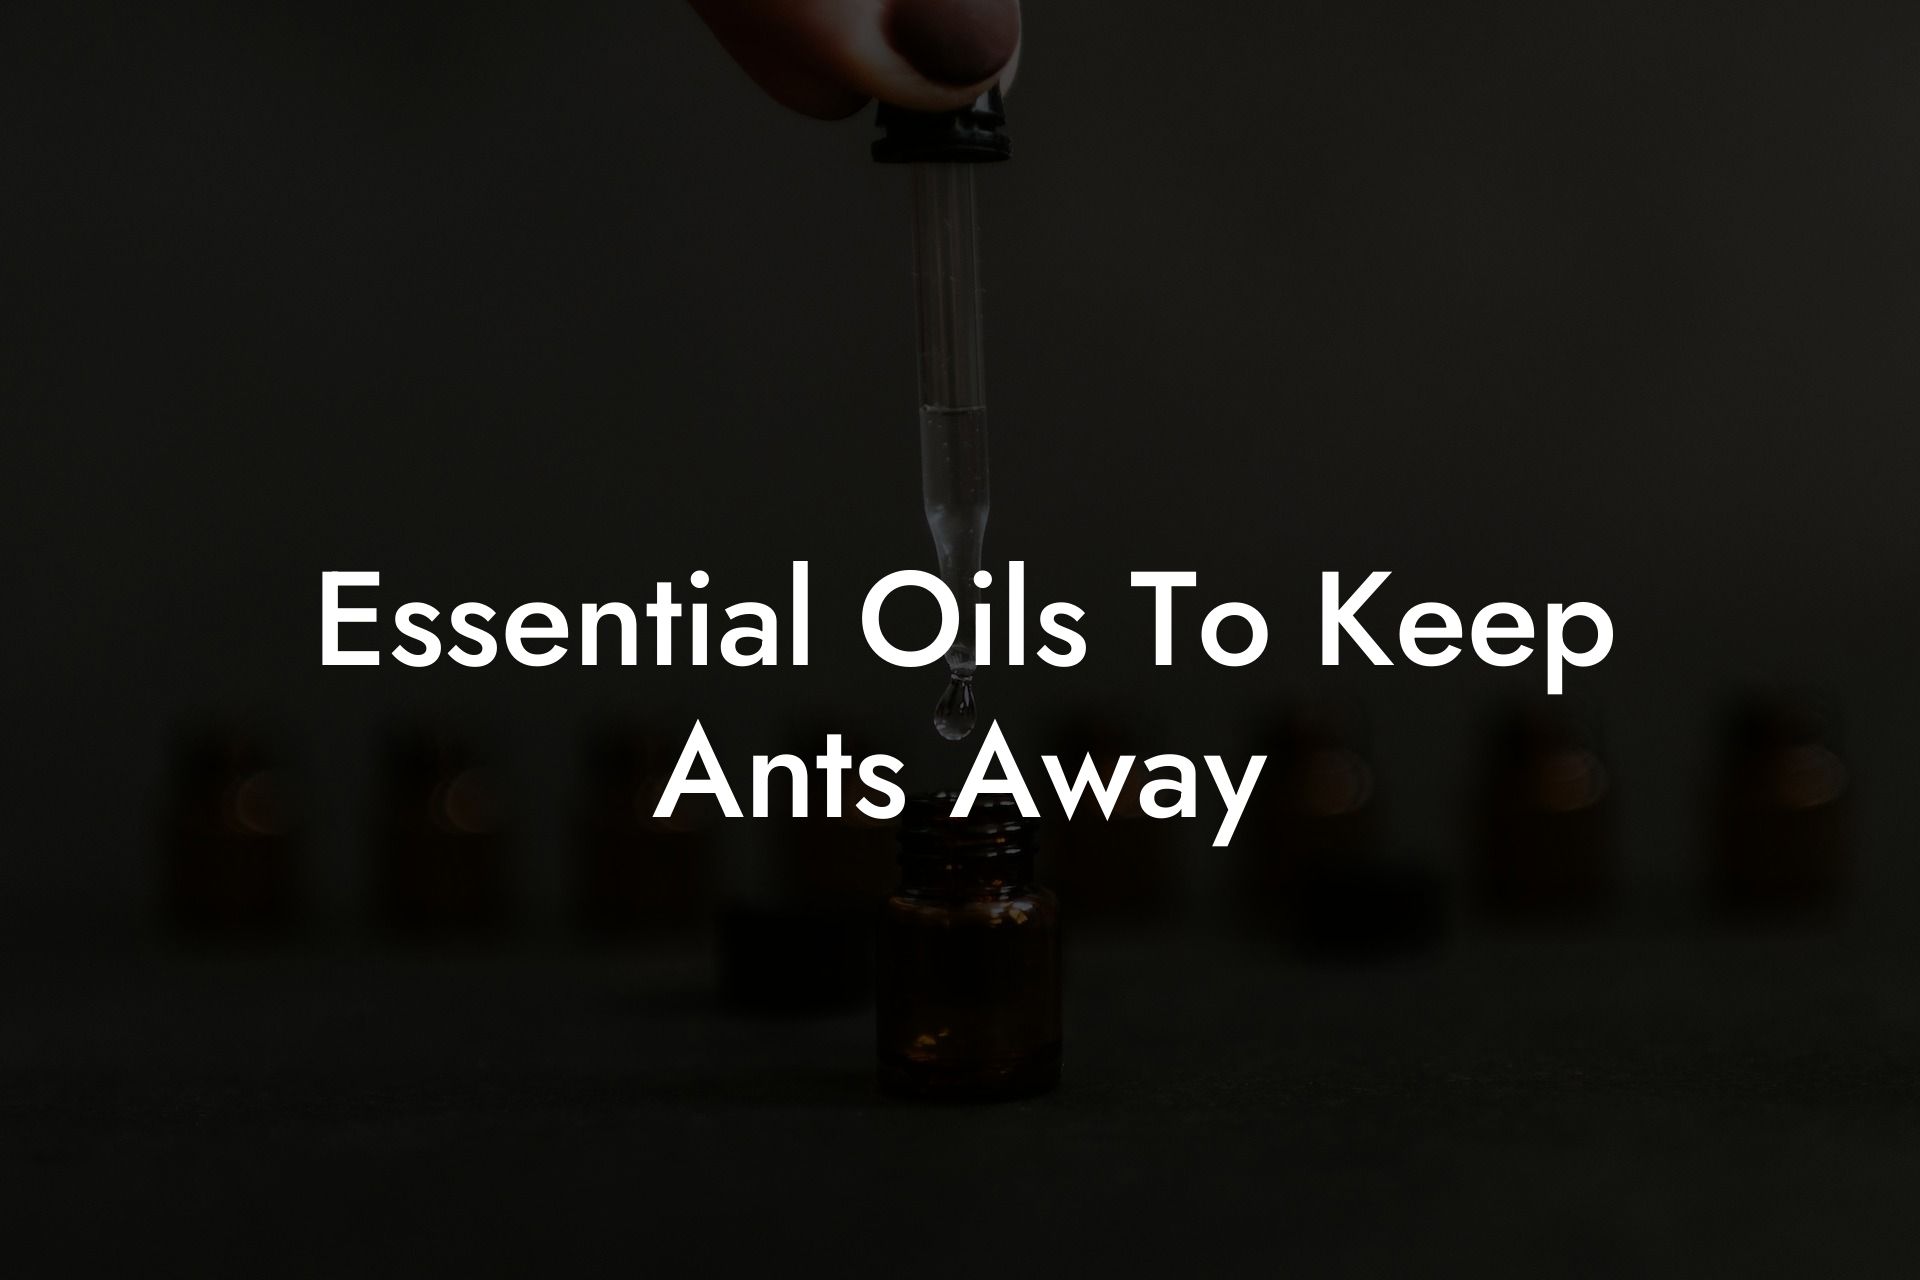 Essential Oils To Keep Ants Away